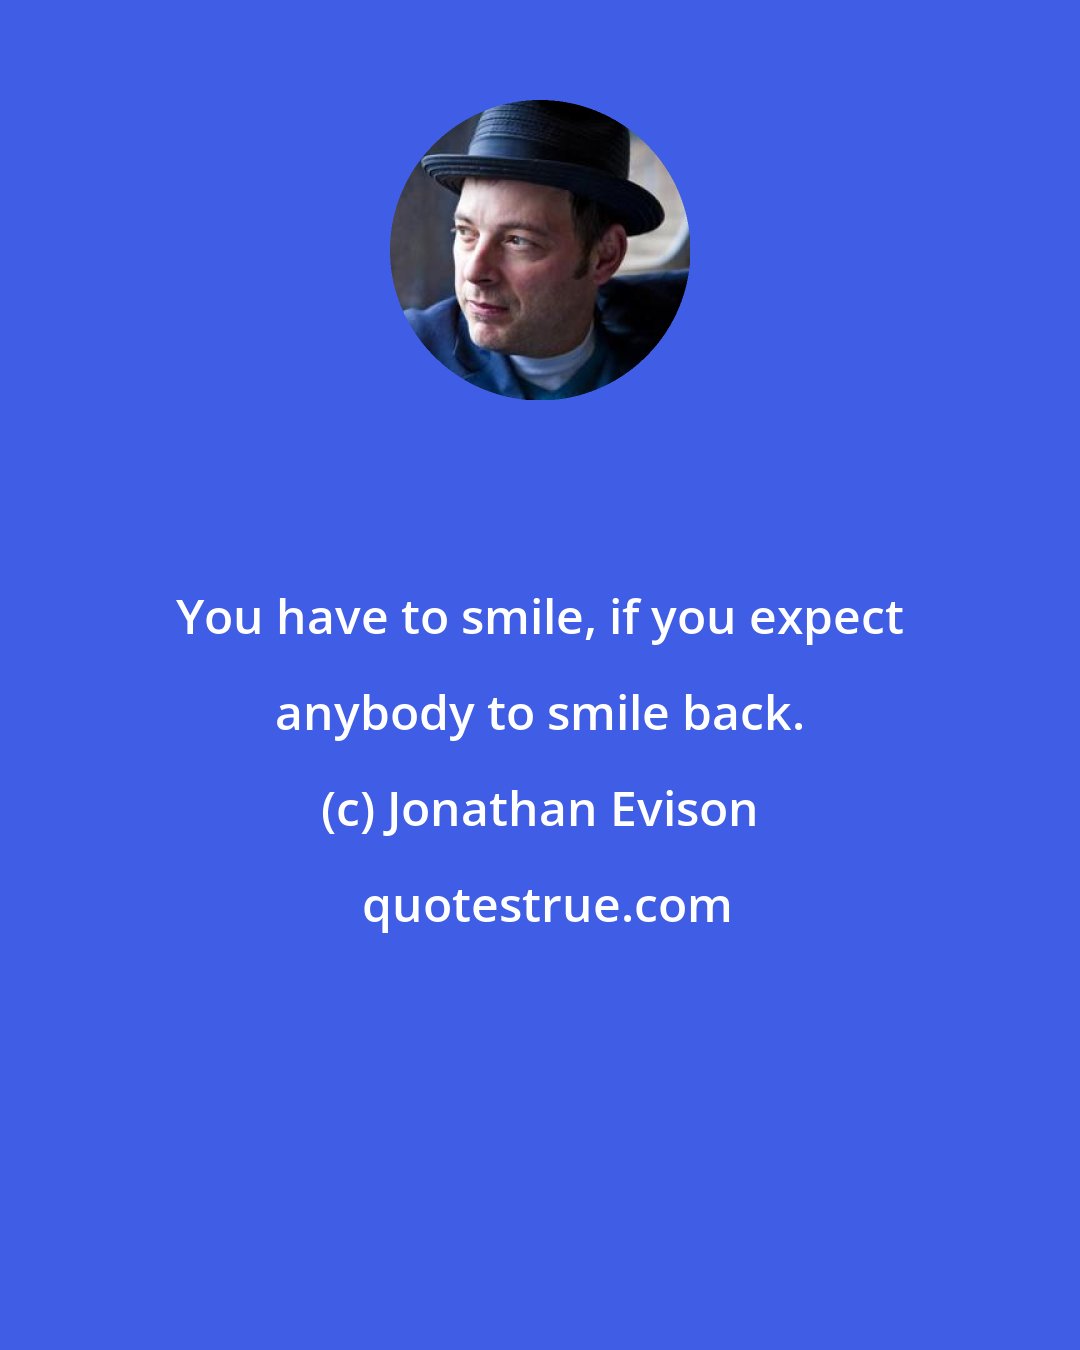 Jonathan Evison: You have to smile, if you expect anybody to smile back.